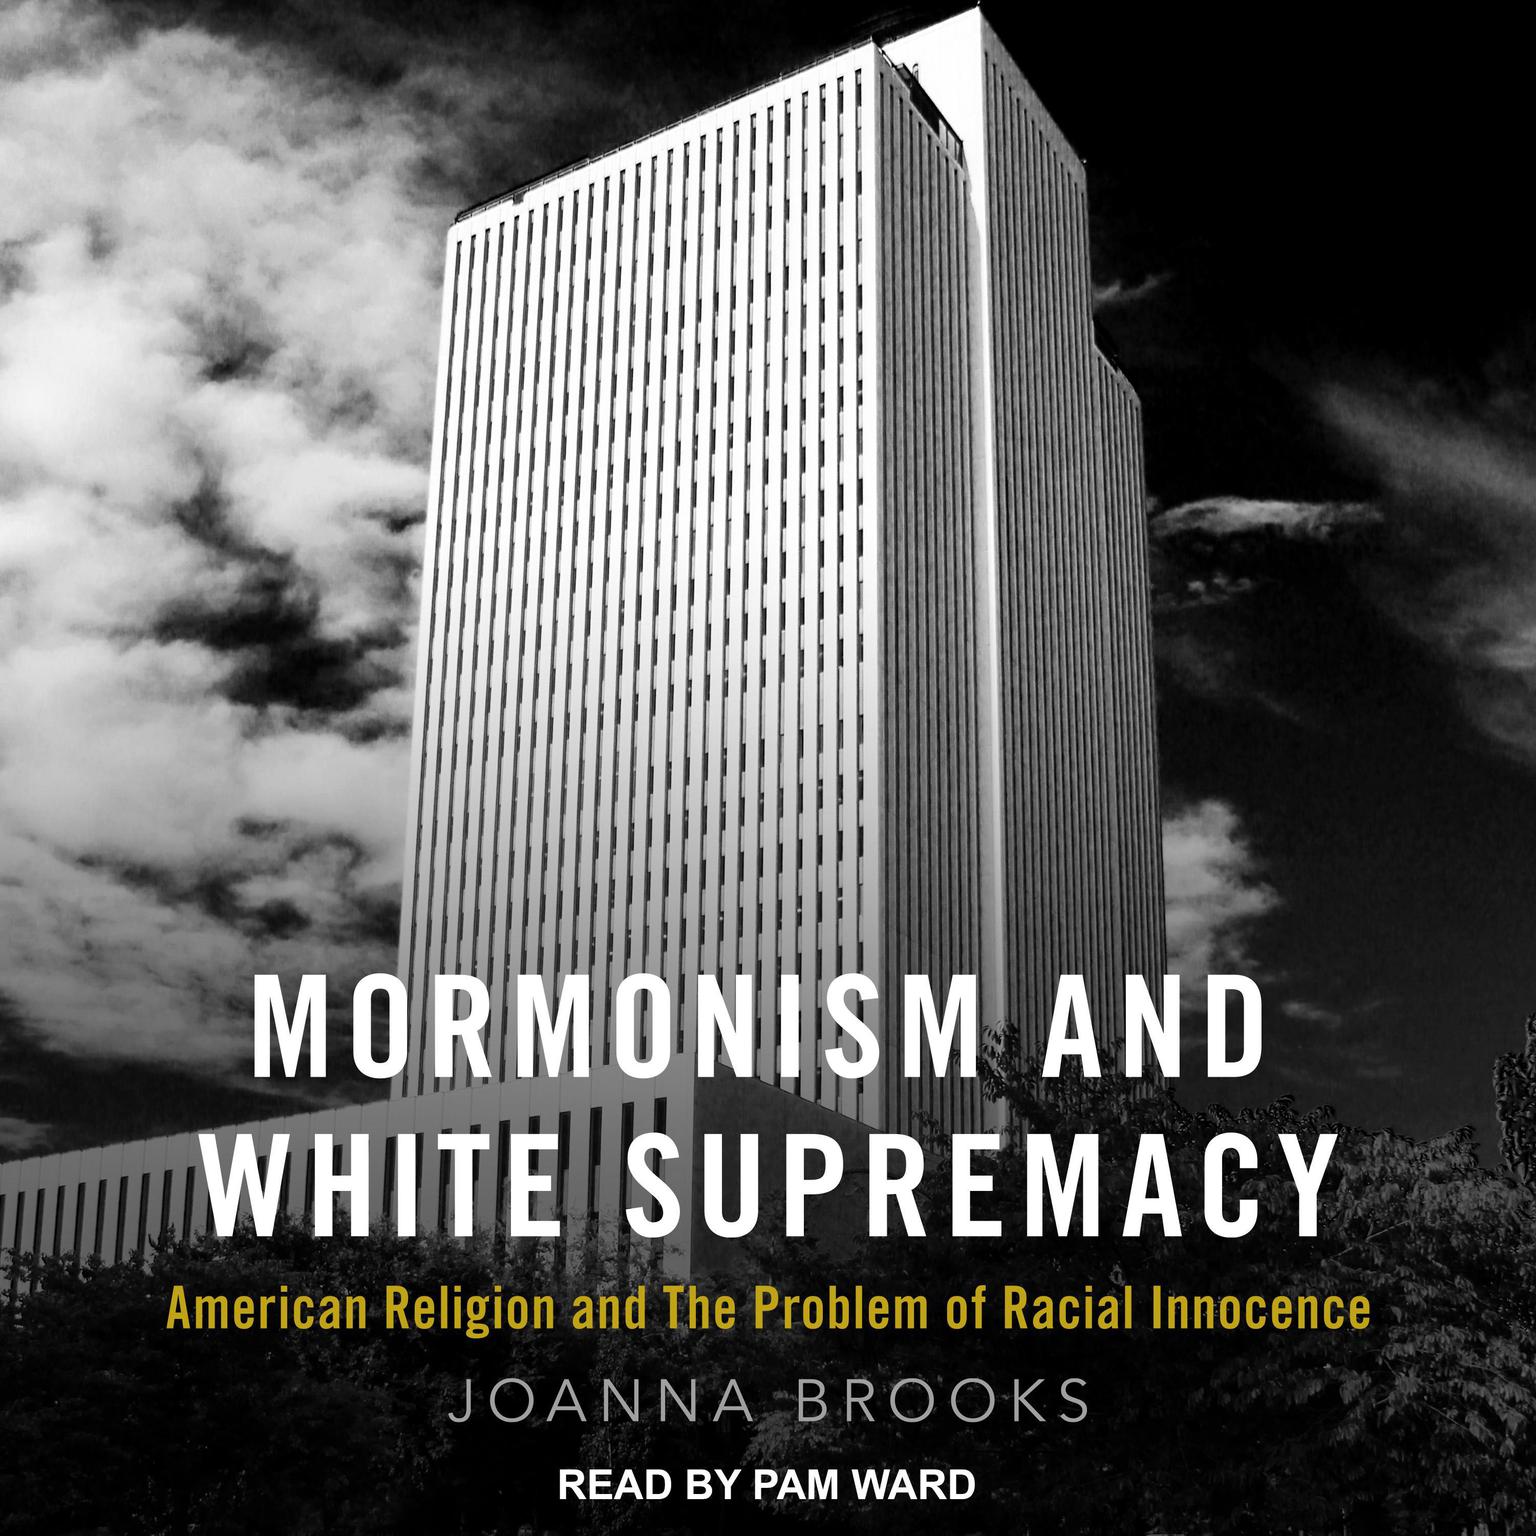 Mormonism and White Supremacy: American Religion and The Problem of Racial Innocence Audiobook, by Joanna Brooks